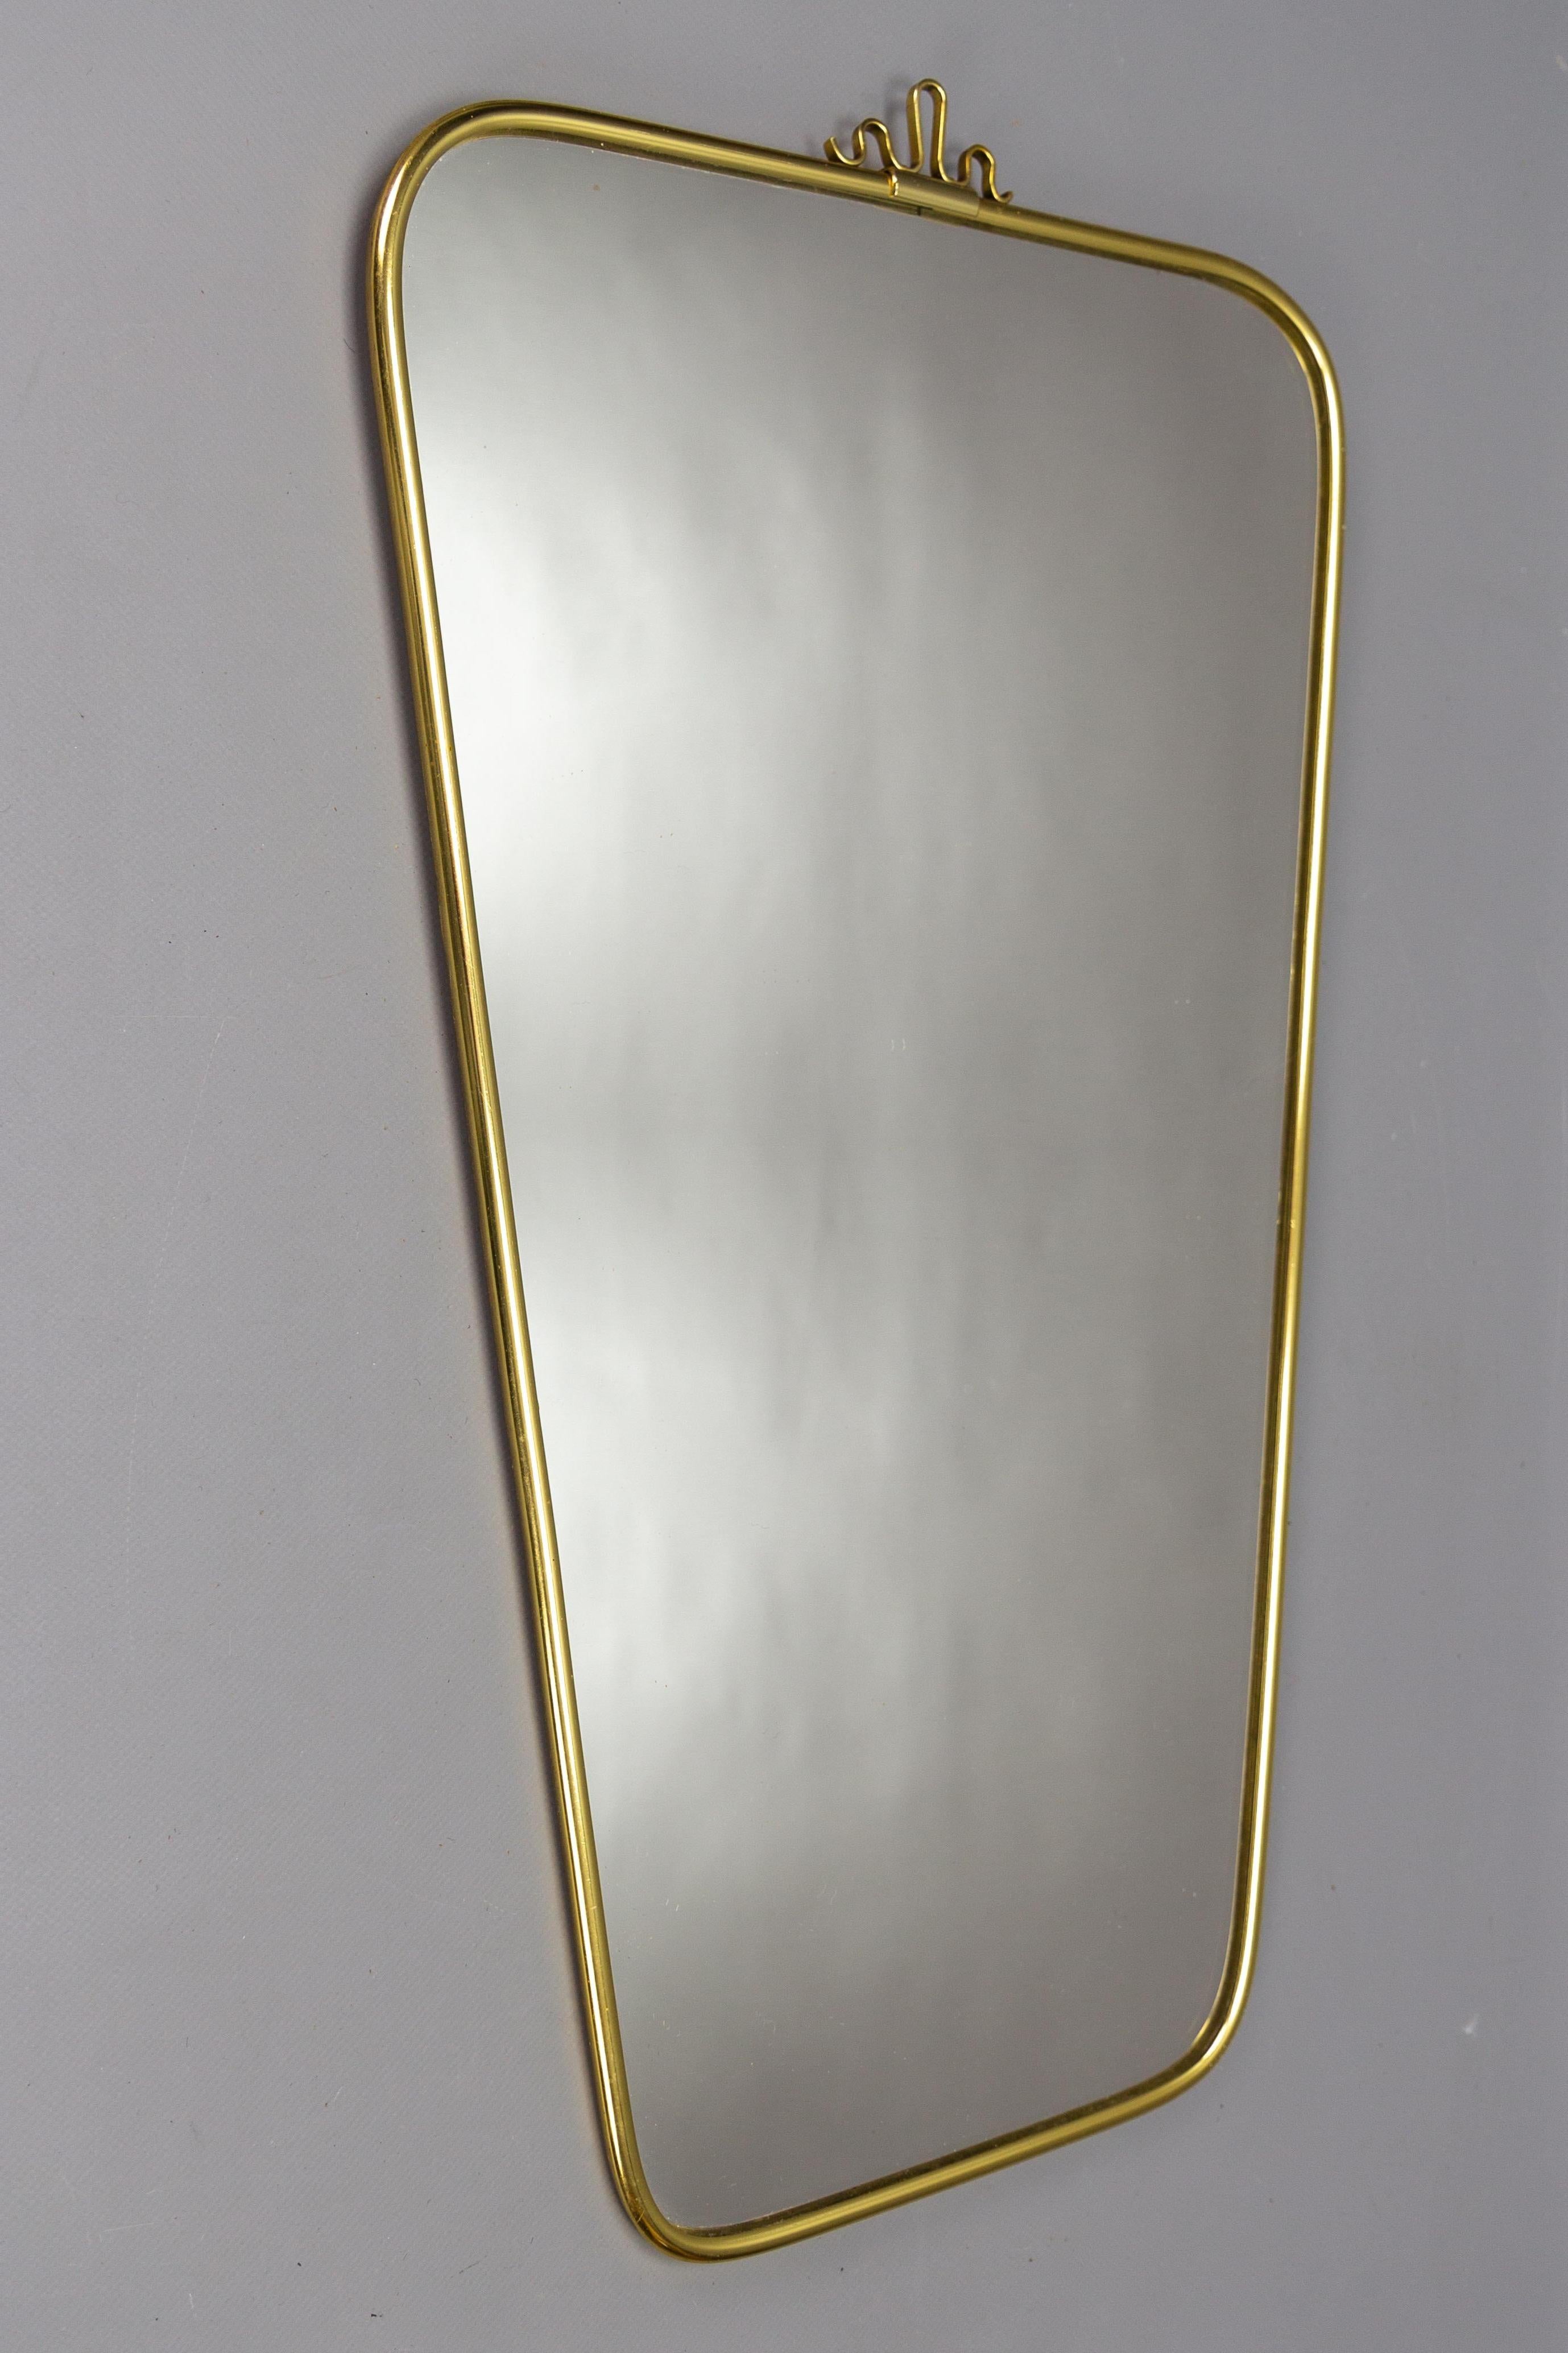 German Mid-Century Modern Brass Frame Wall Mirror by Lenzgold, 1960s For Sale 16